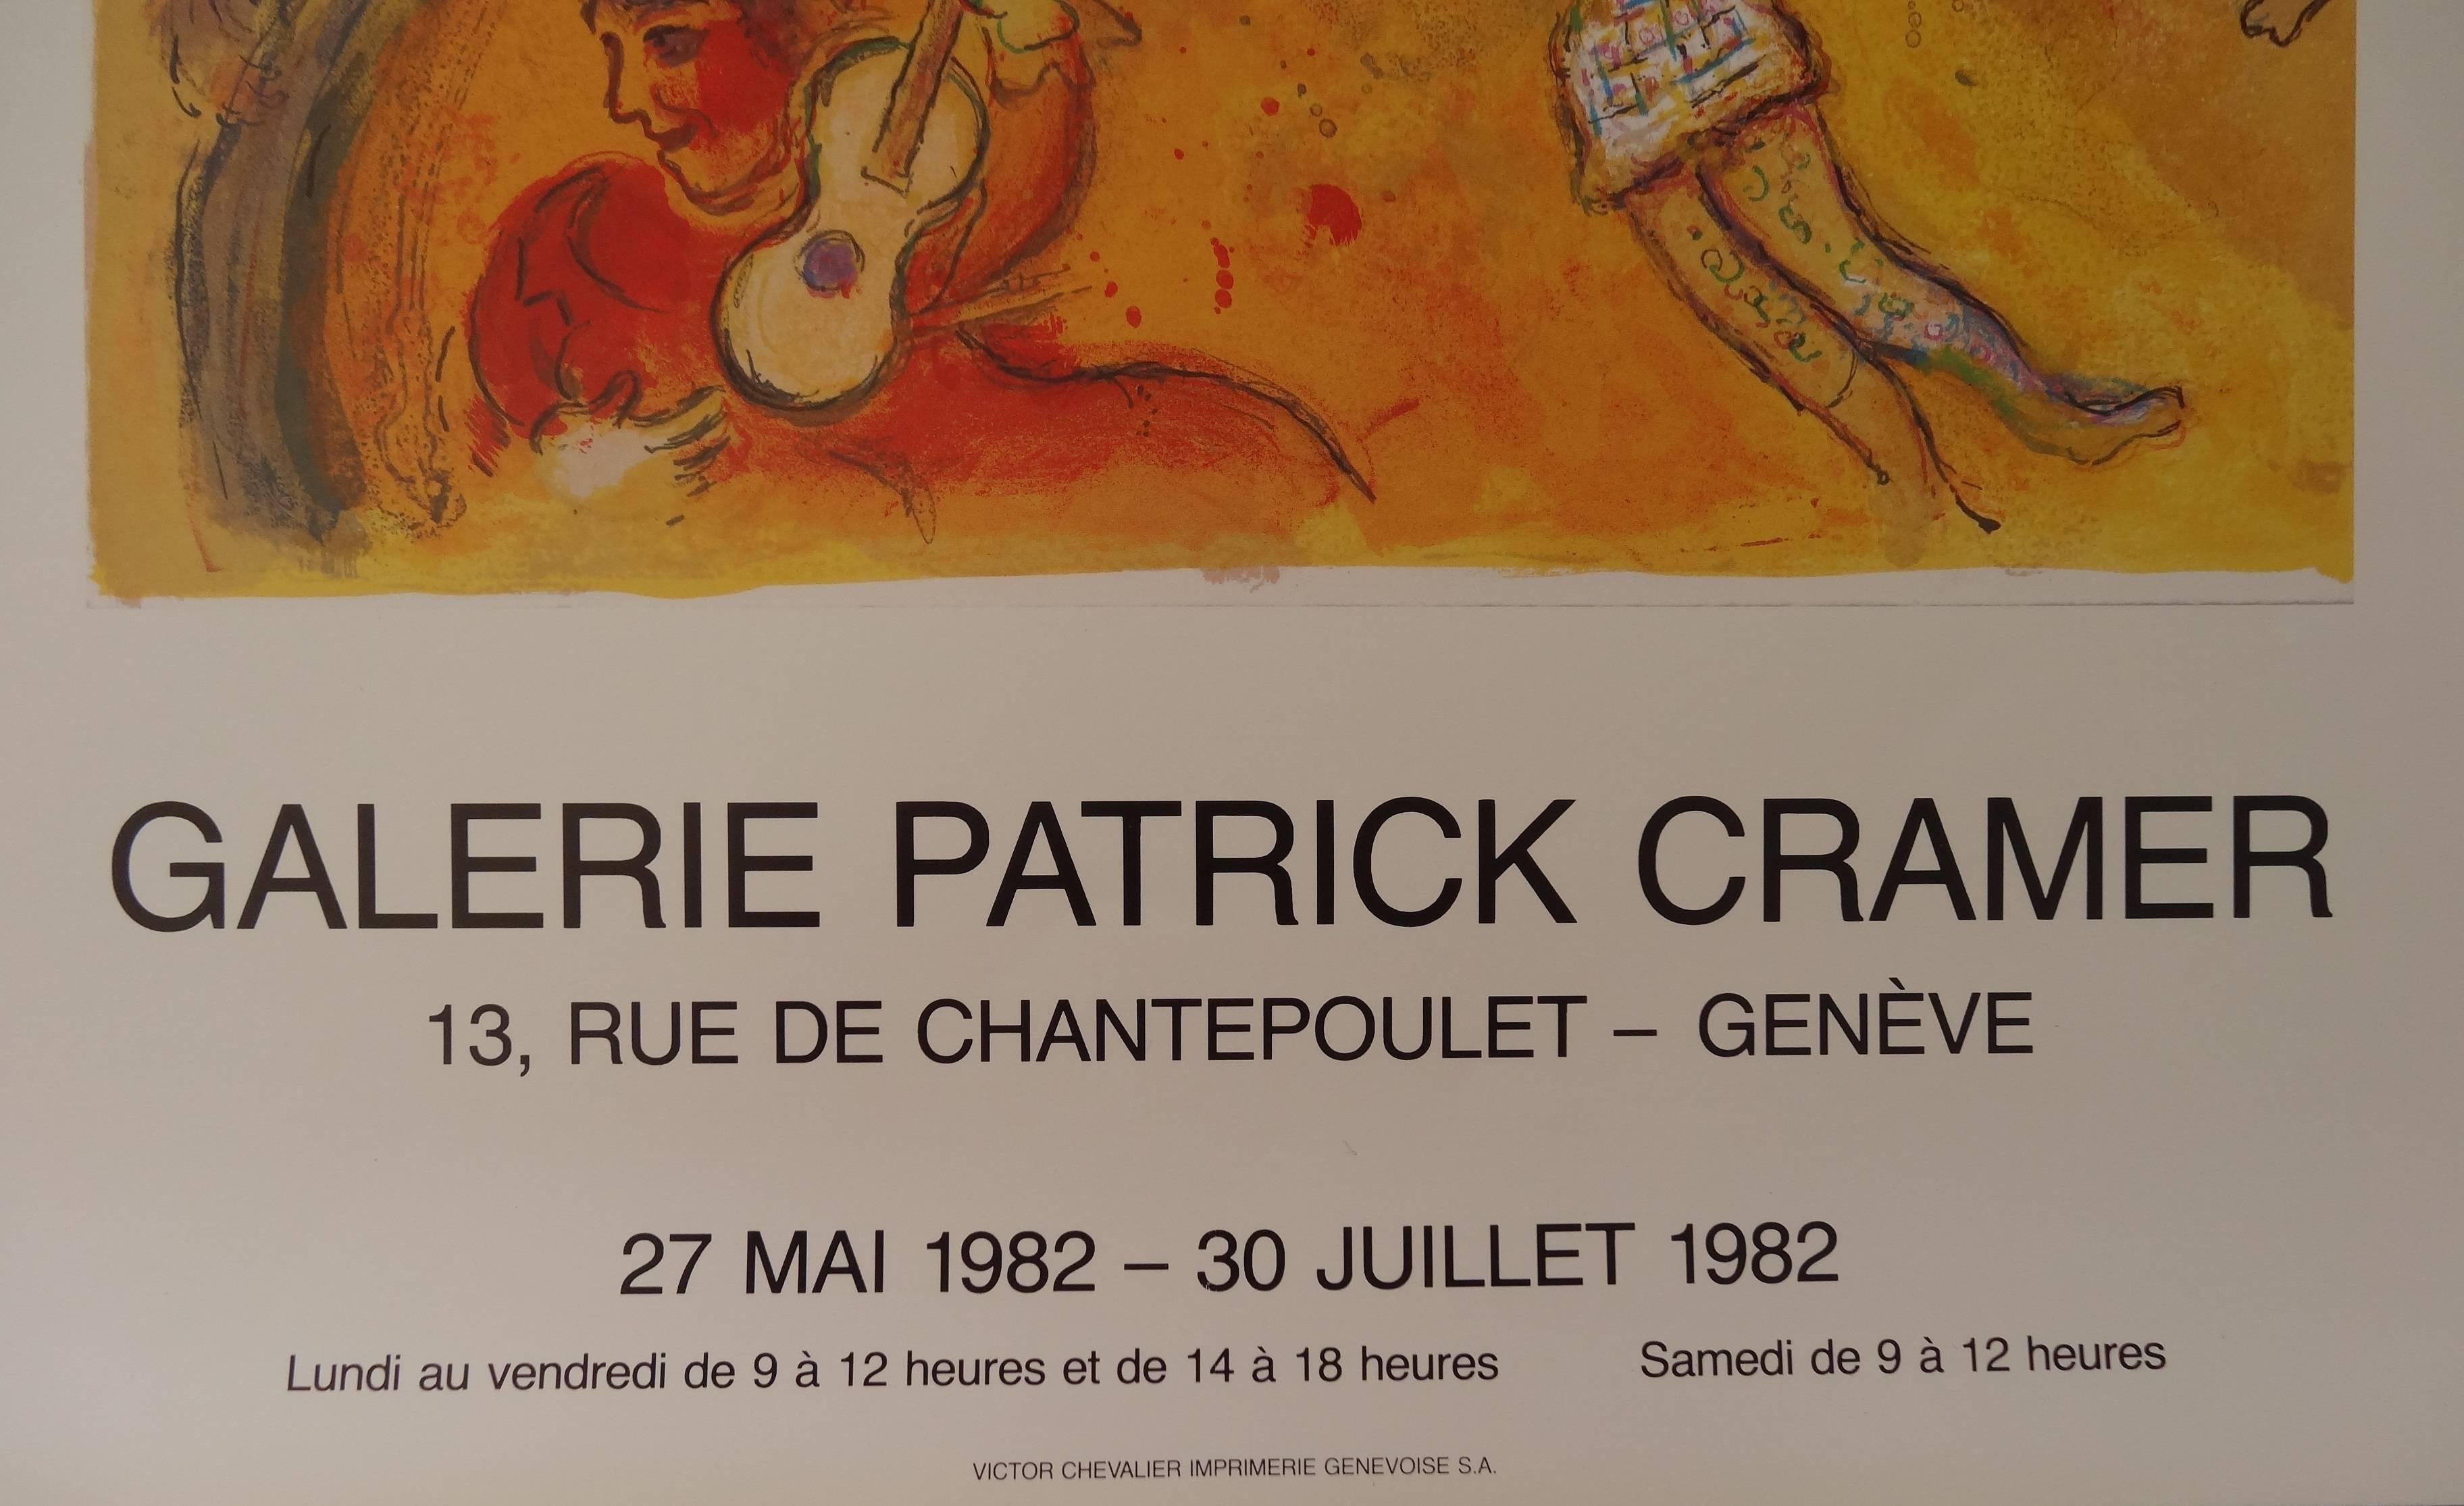 Circus - 25 illustrated books - Vintage poster - 1982 - Brown Figurative Print by (after) Marc Chagall